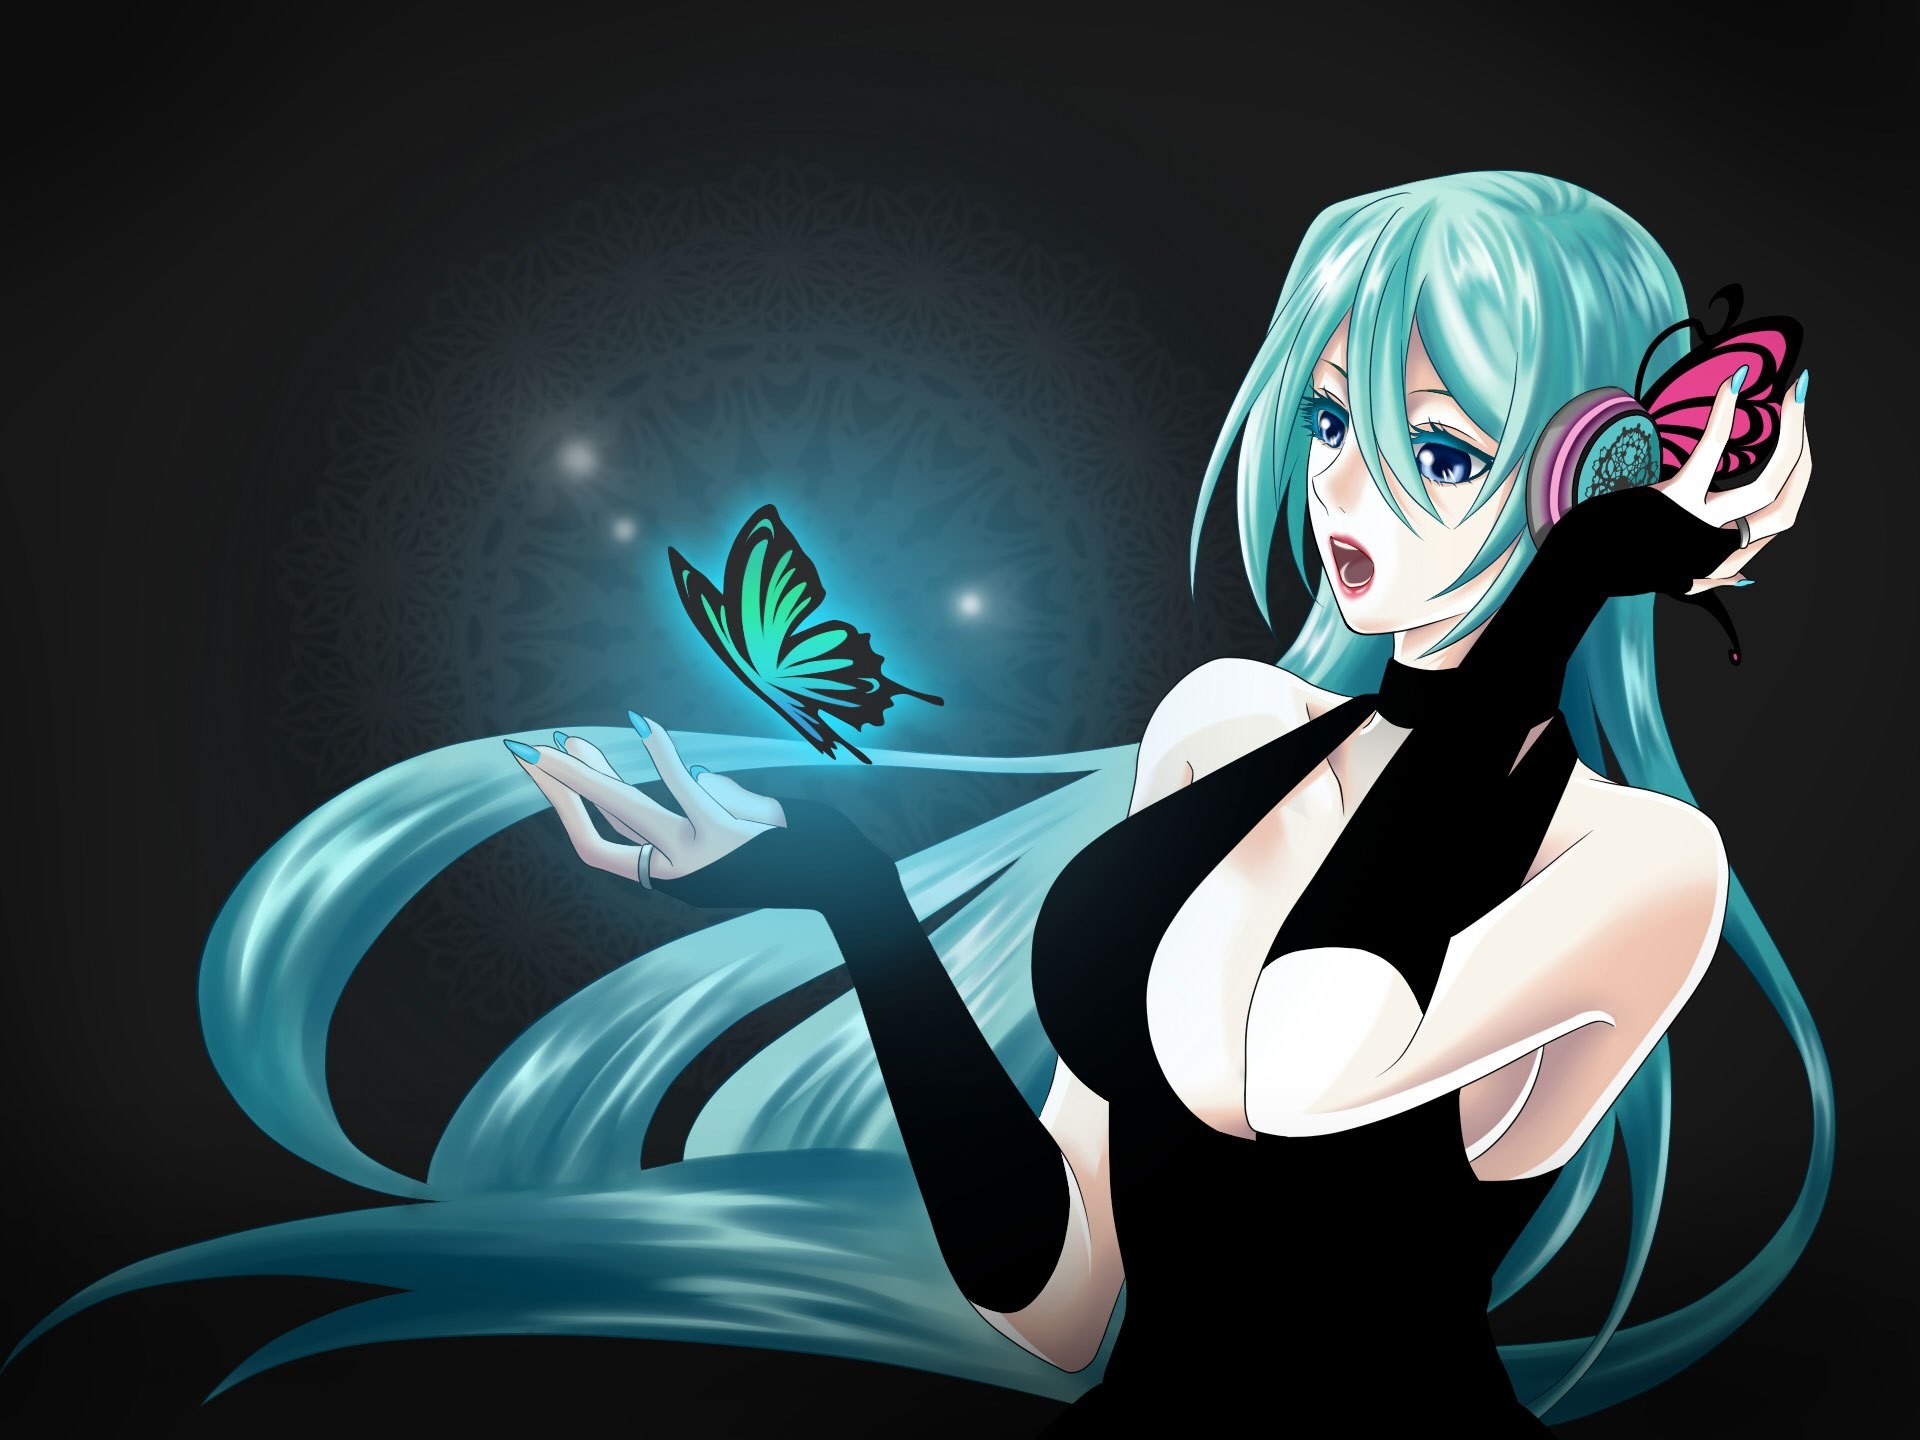 1920x1440 ... Nice Anime Wallpapers Hd Free Wallpaper For Desktop and Mobile in All  Resolutions Free Download nature Best ...